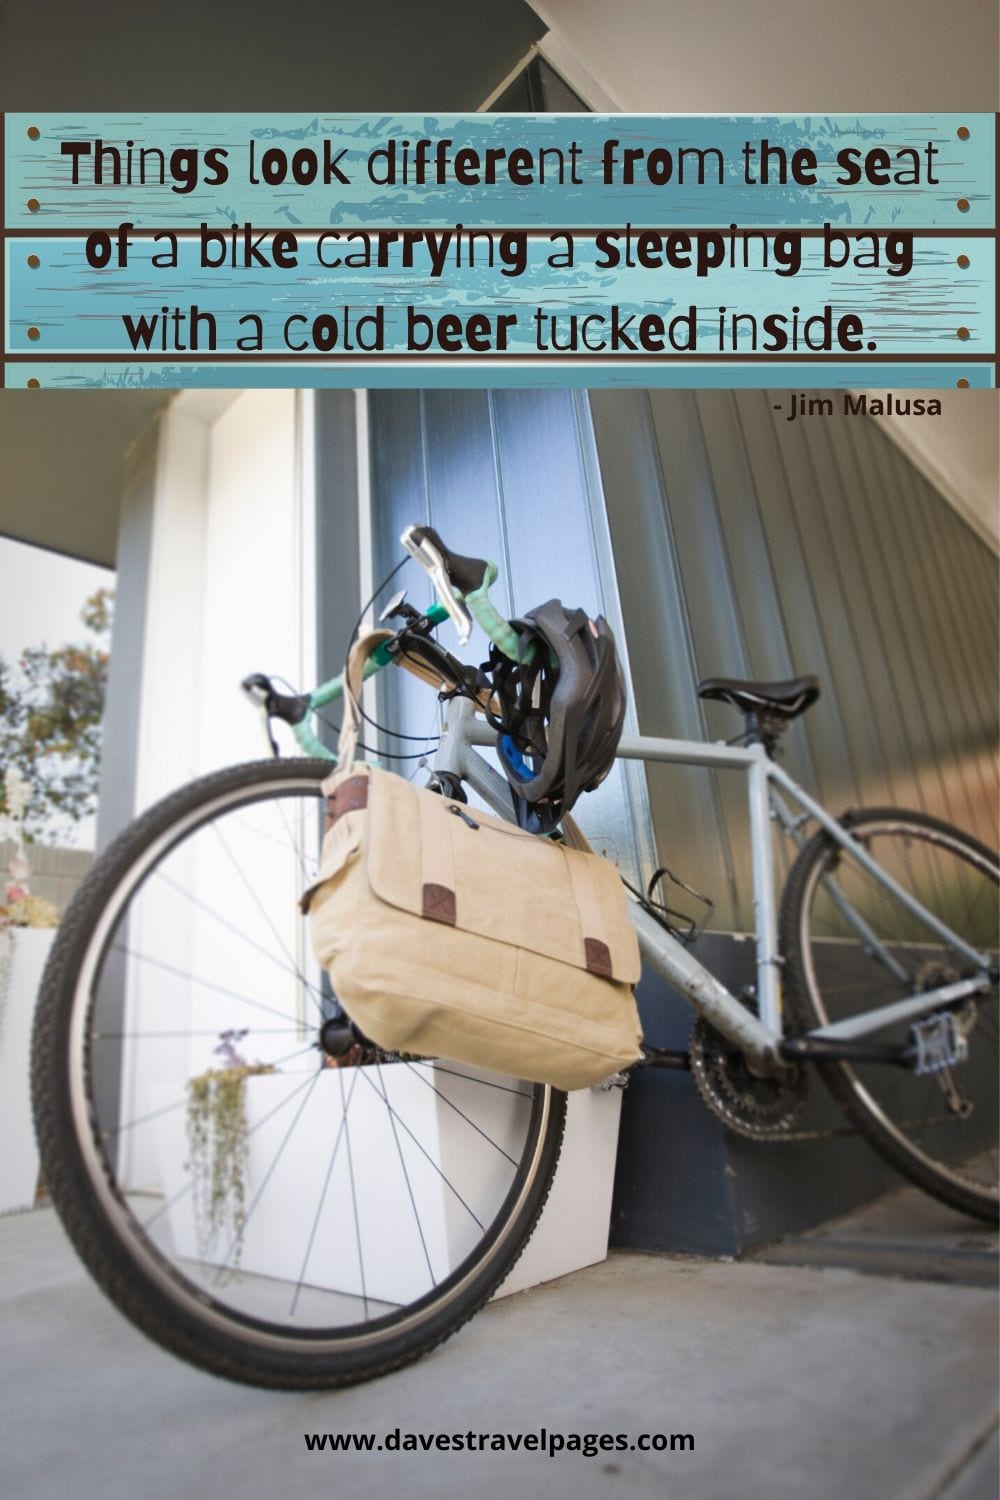 Things look different from the seat of a bike carrying a sleeping bag with a cold beer tucked inside. ~Jim Malusa